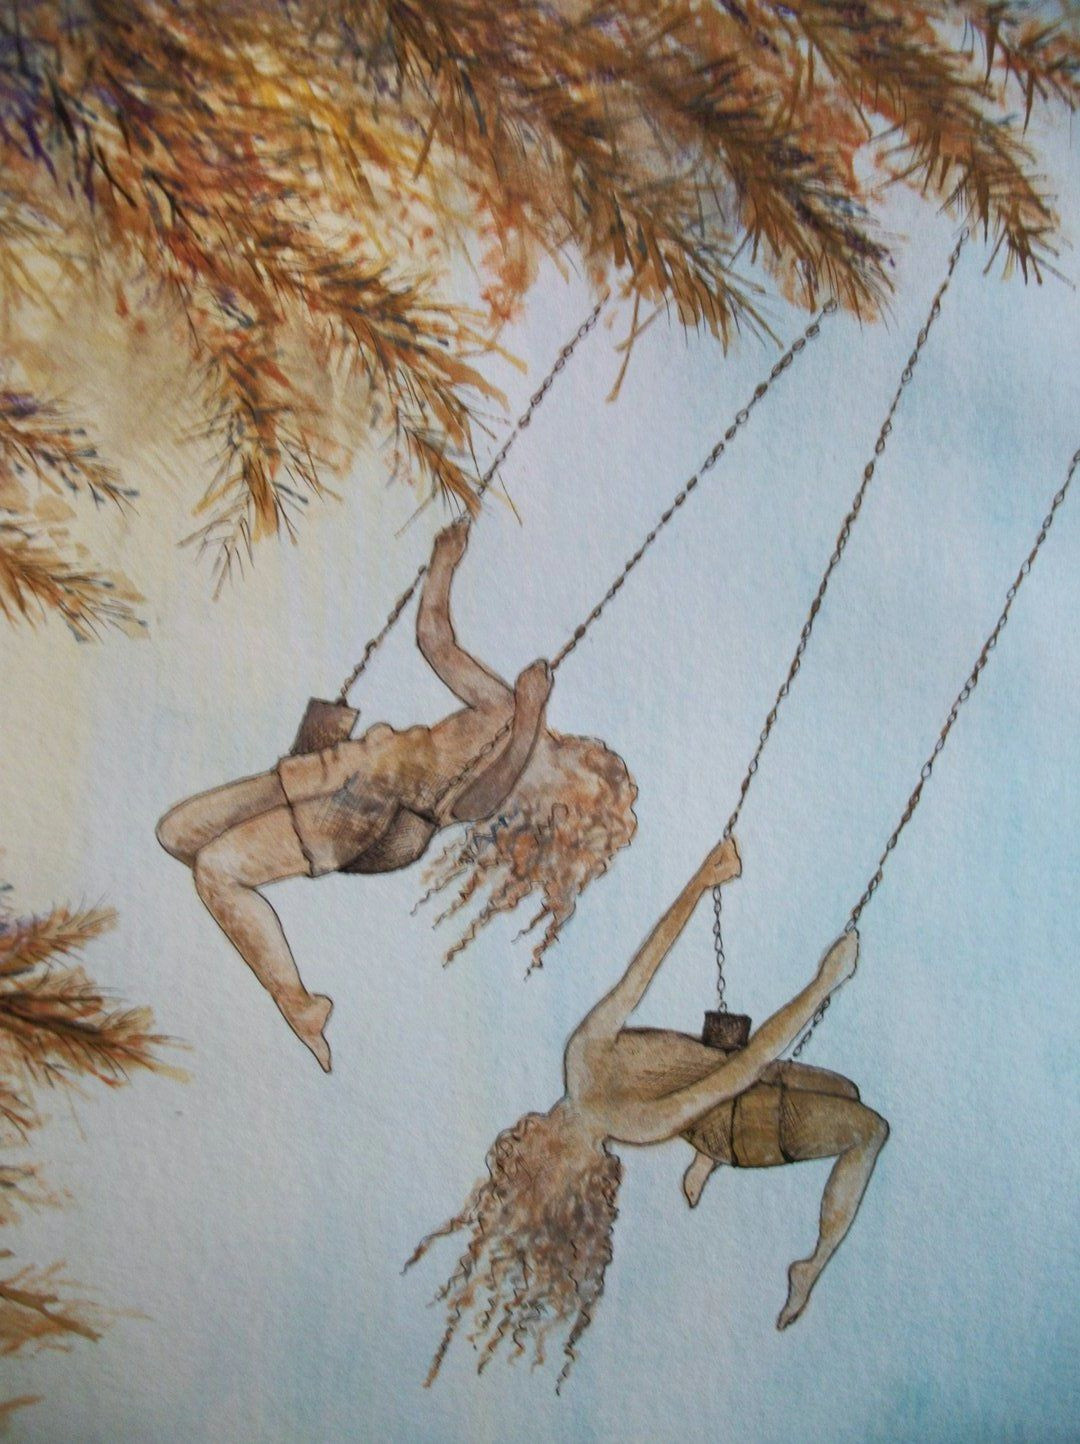 Drawing Of Girl On Swing This is An original Watercolor Painting Of Two Girls On Swings In